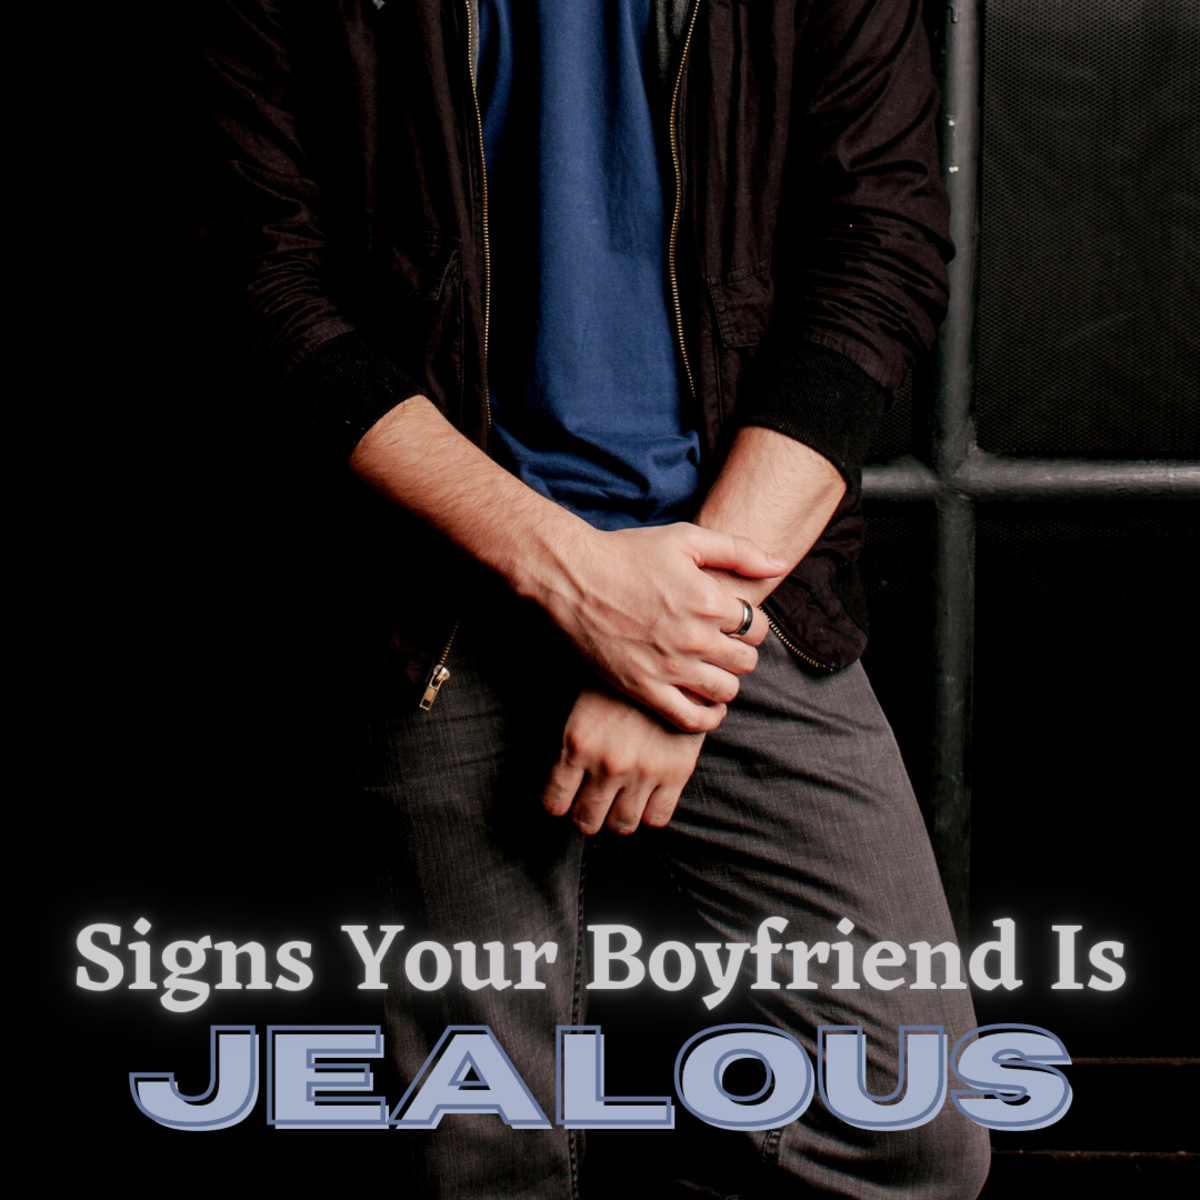 7 Signs He Is Jealous: How to Deal With a Jealous Boyfriend (Even If He's Hiding It)